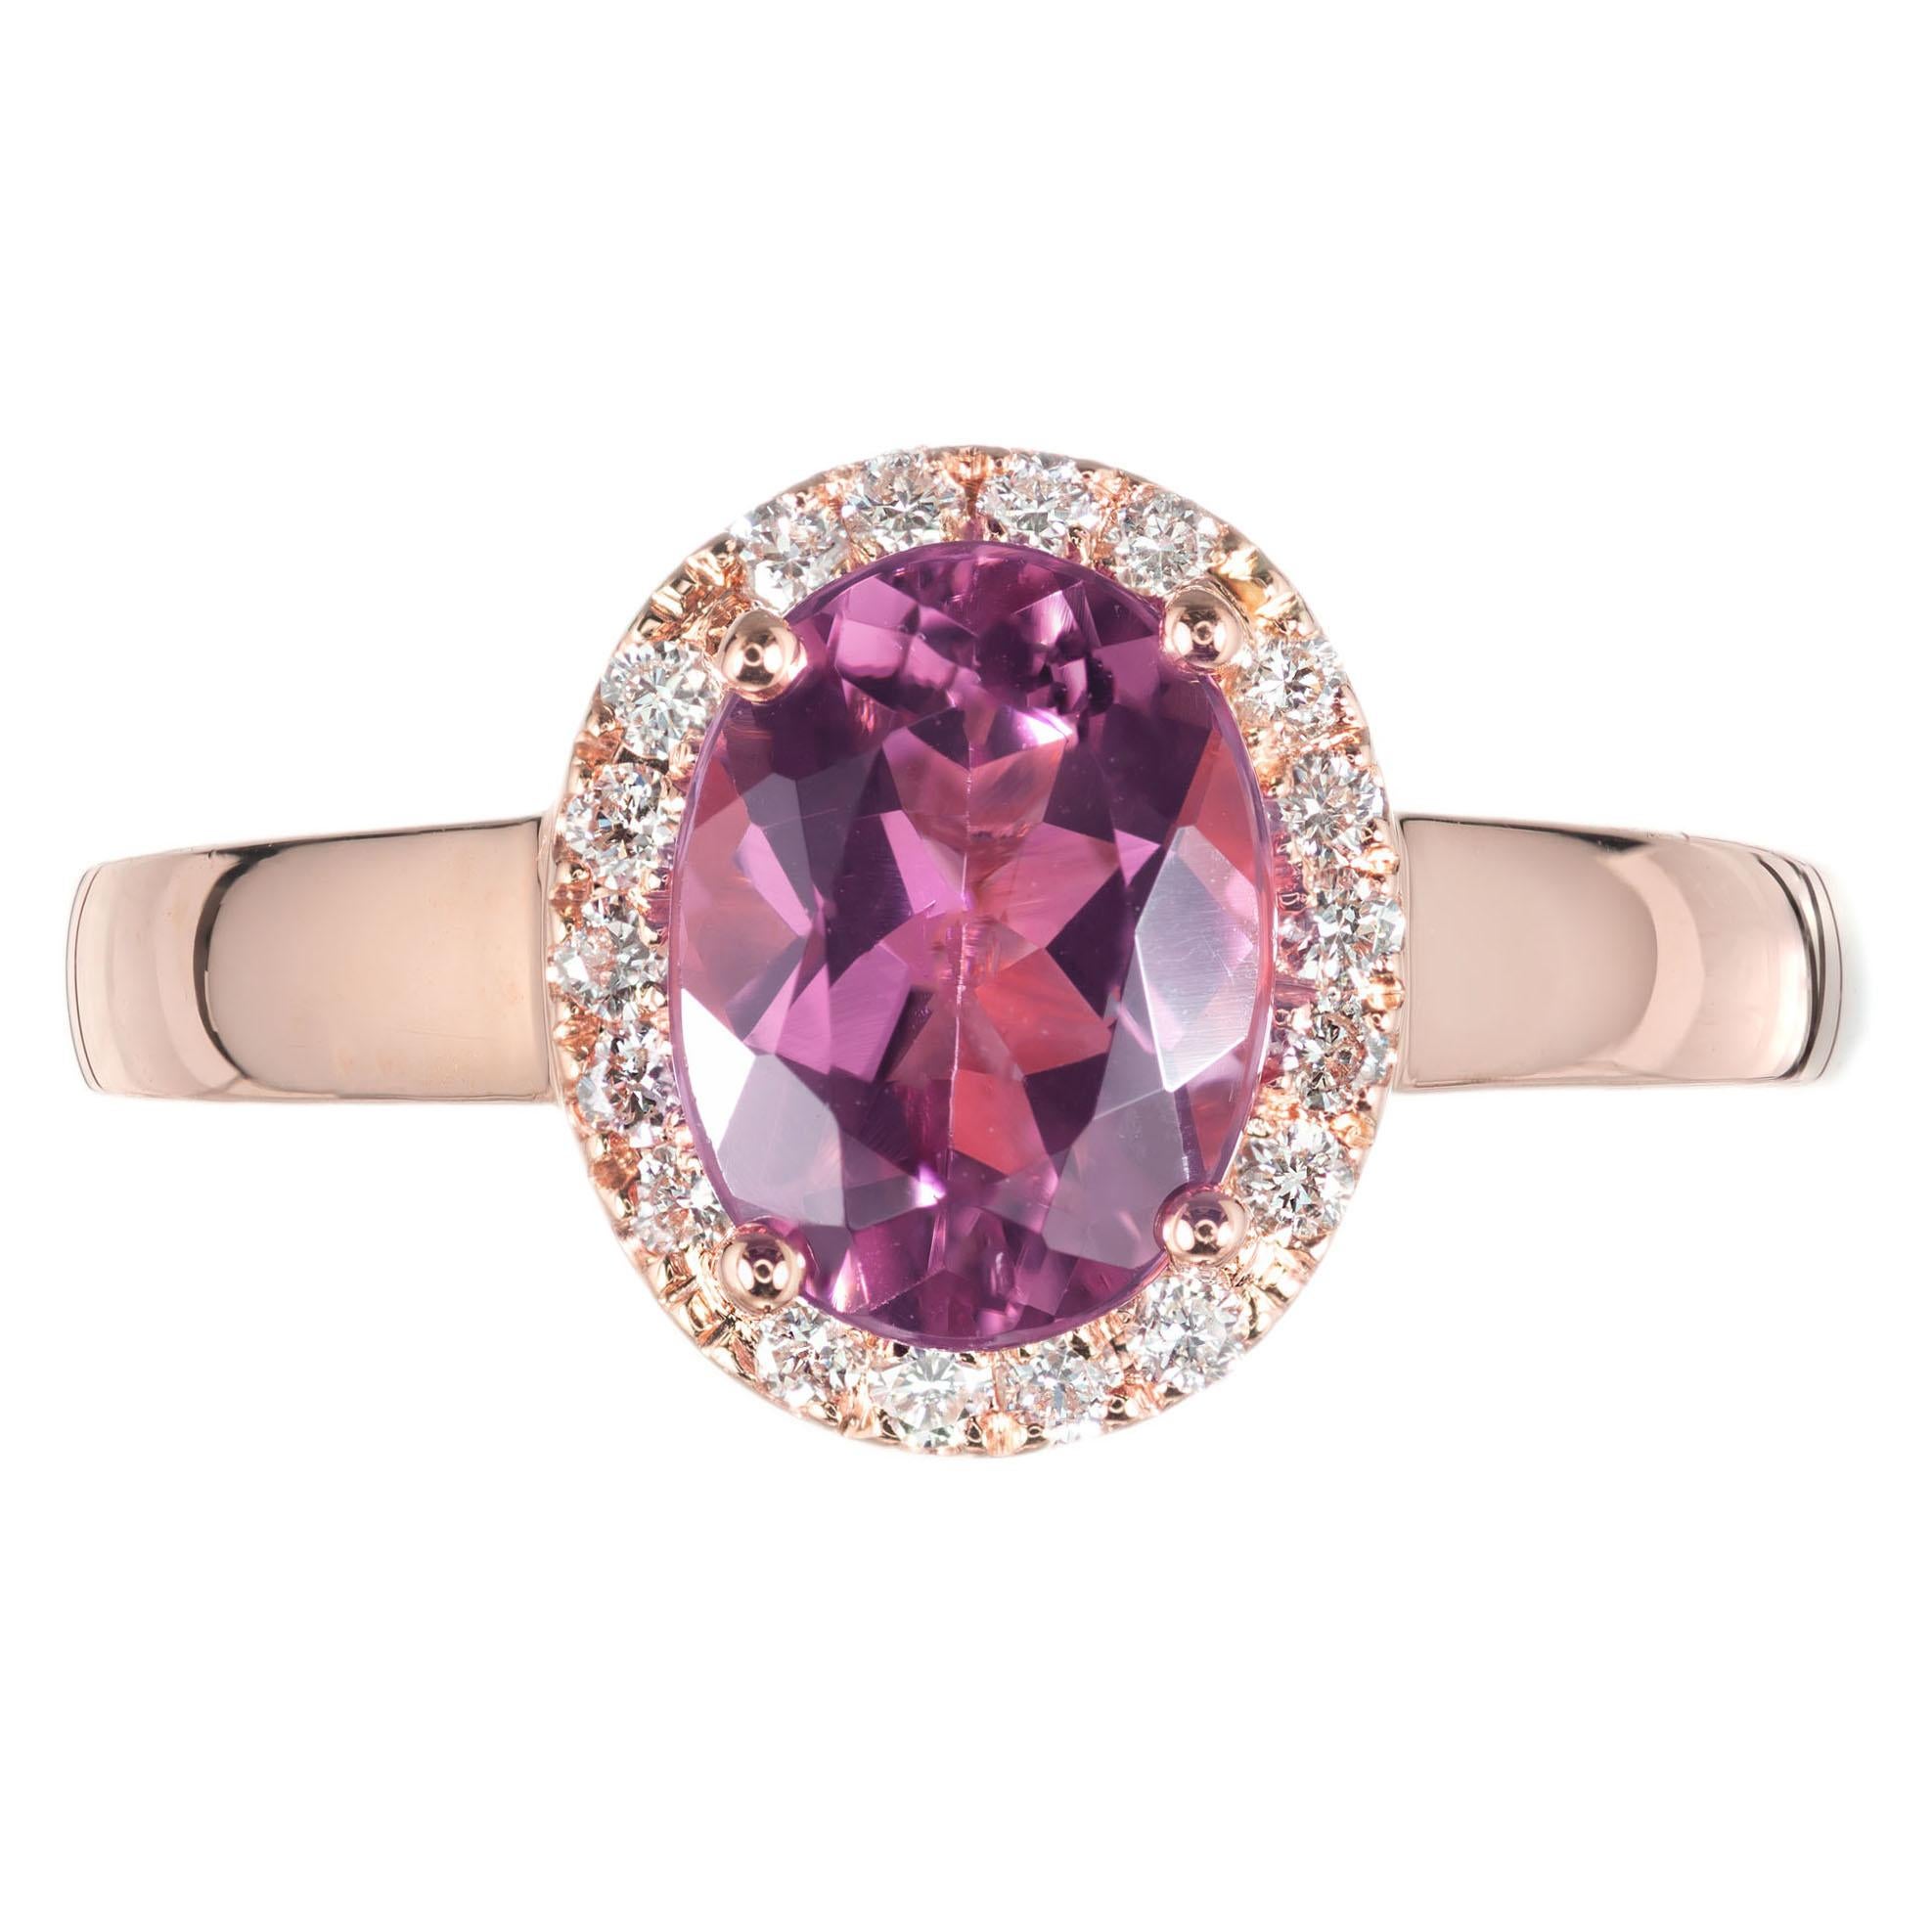 Peter Suchy oval pink Tourmaline & Diamond halo engagement ring. Oval pink center tourmaline with a halo of 18 round full cut diamonds in a 18k rose gold setting. 

1 oval pink Tourmaline, 1.20cts, SI, 8.6mm
18 round full cut Diamonds, approx. total